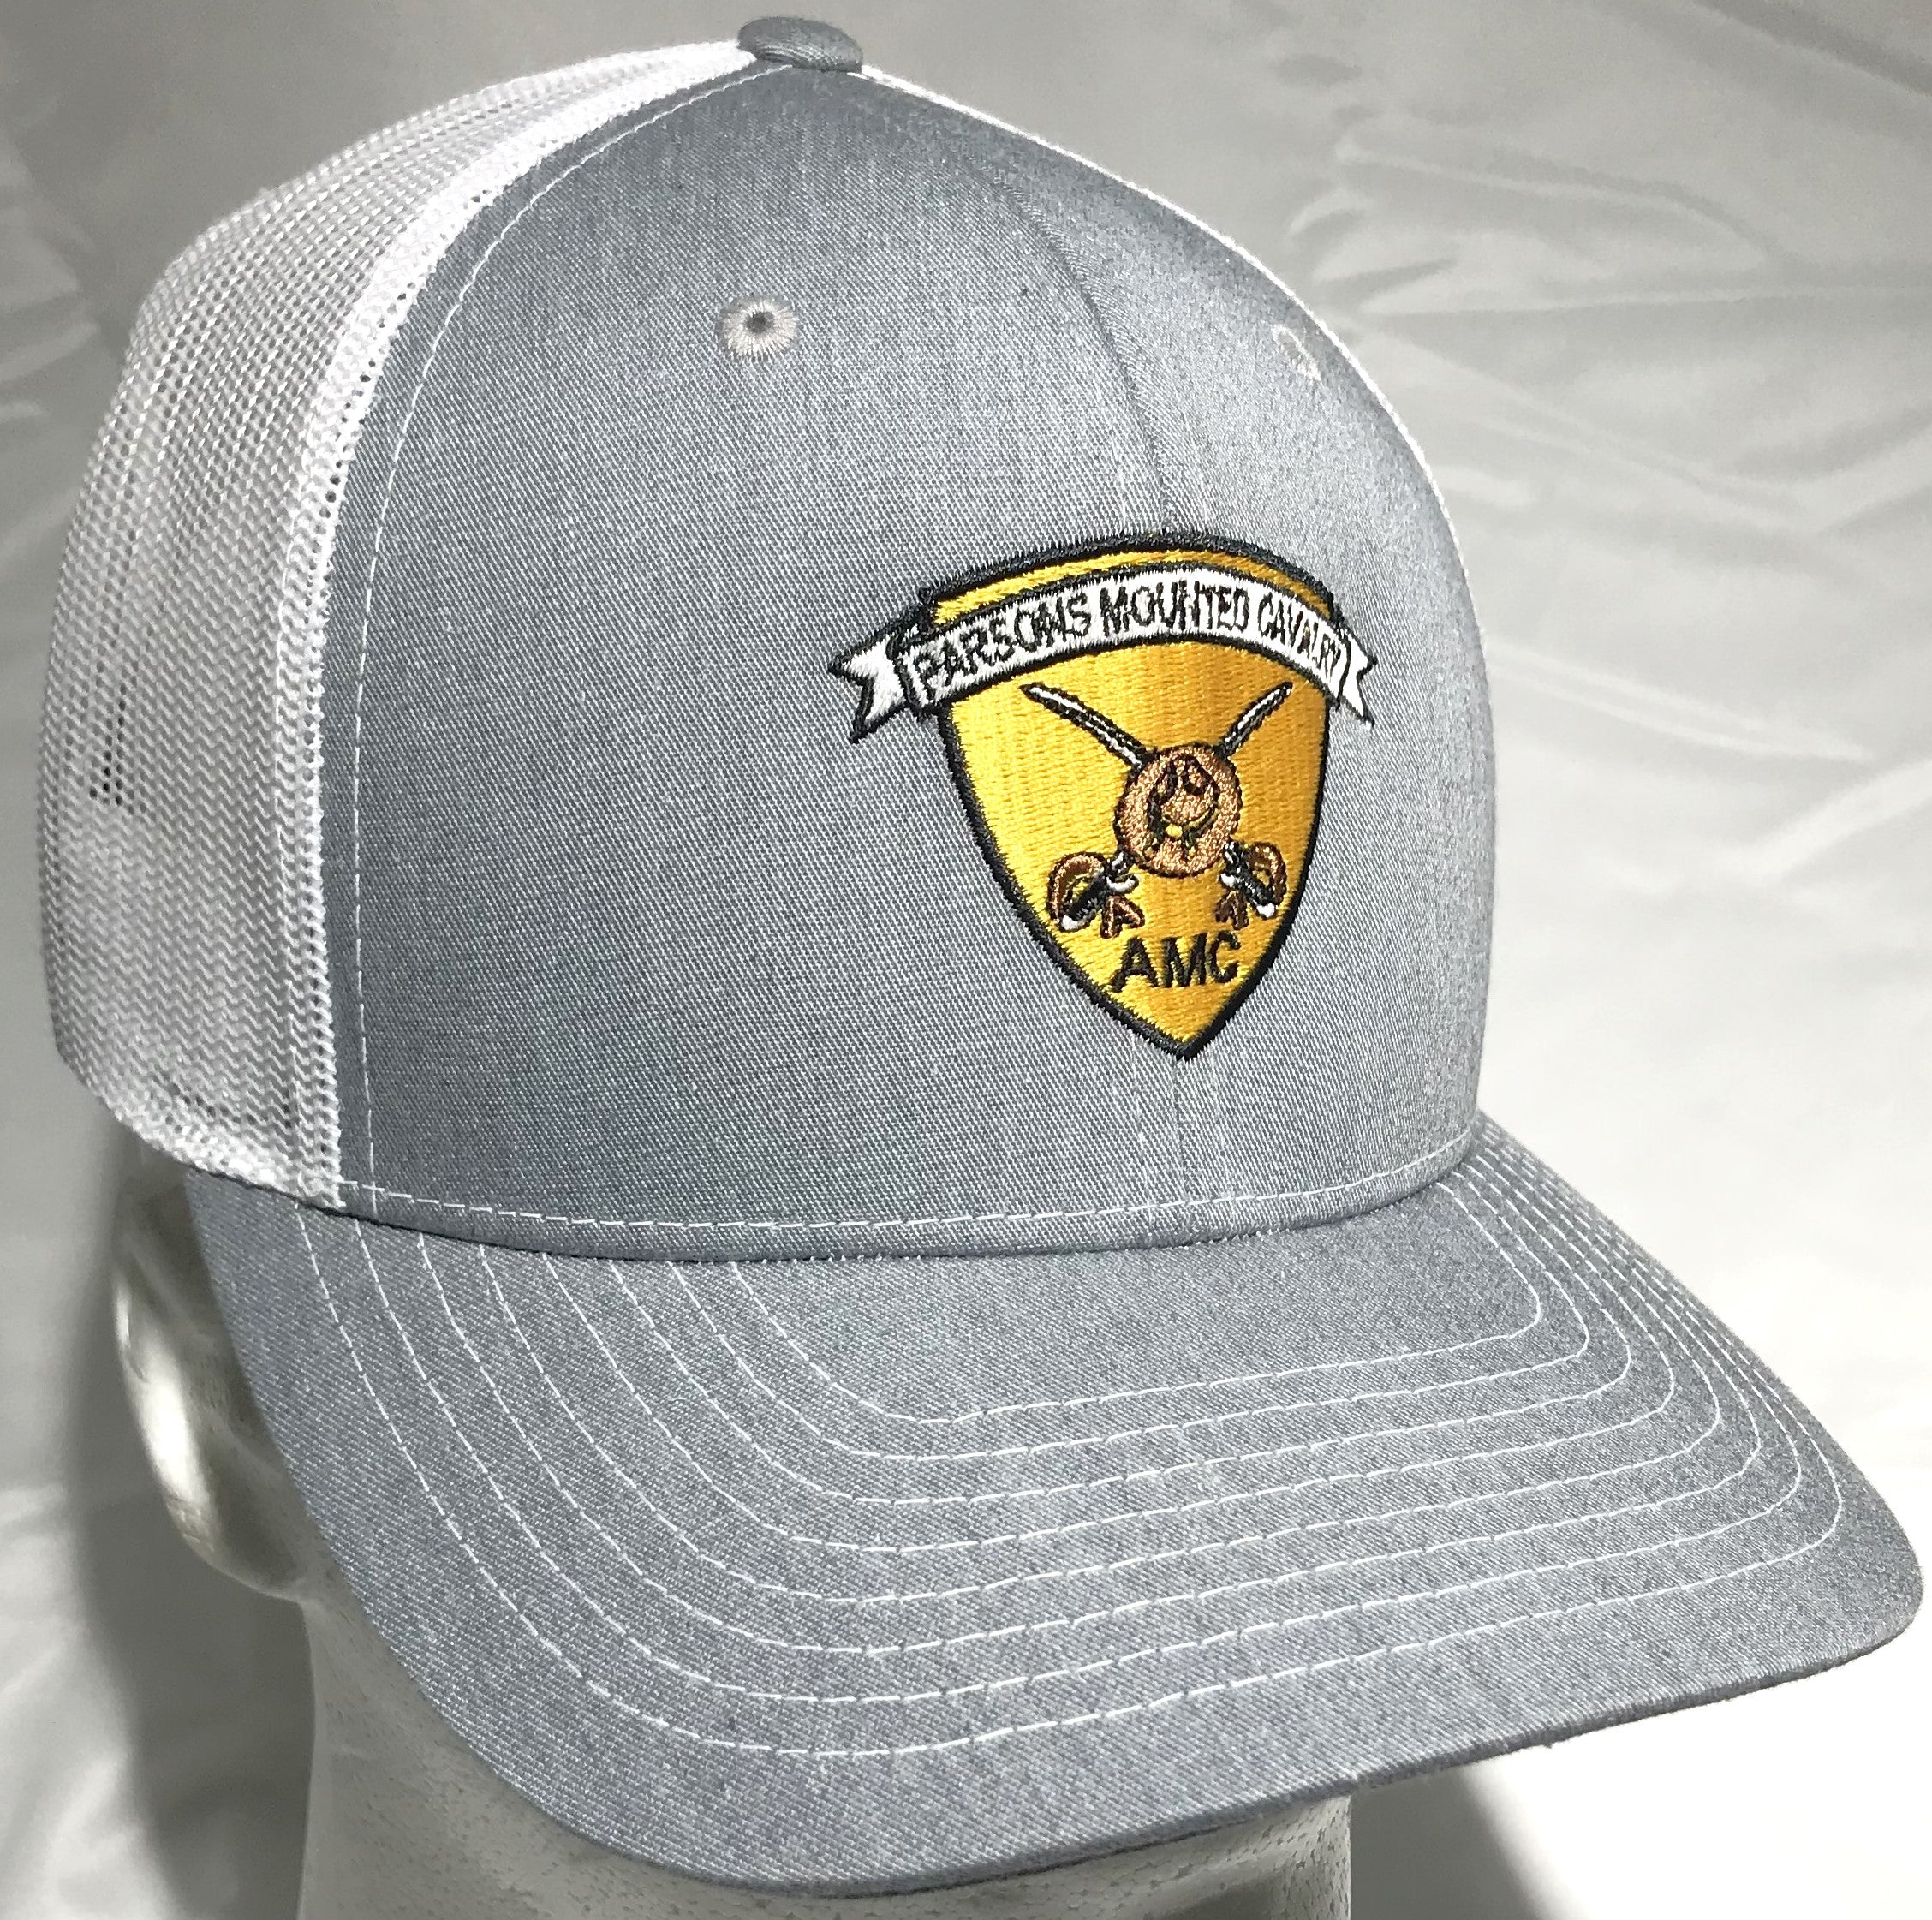 Parsons Mounted Cavalry Trucker Hat